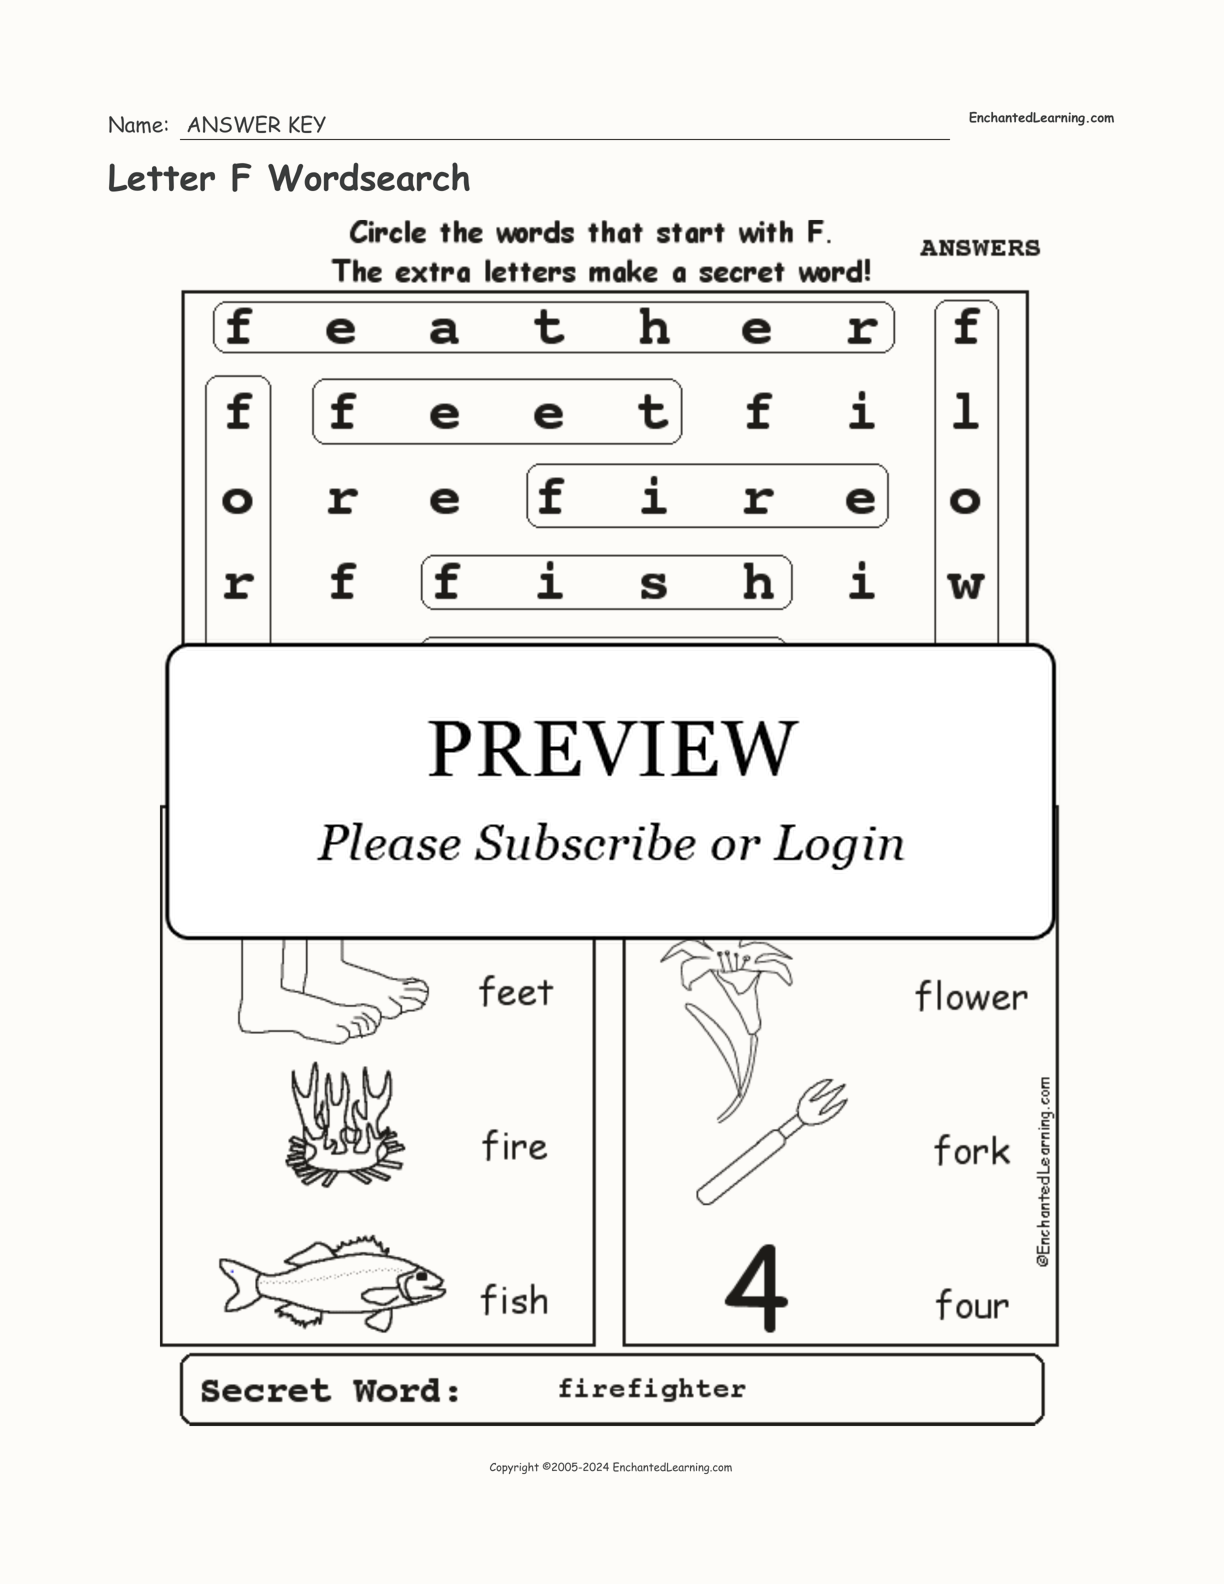 Letter F Wordsearch interactive worksheet page 2